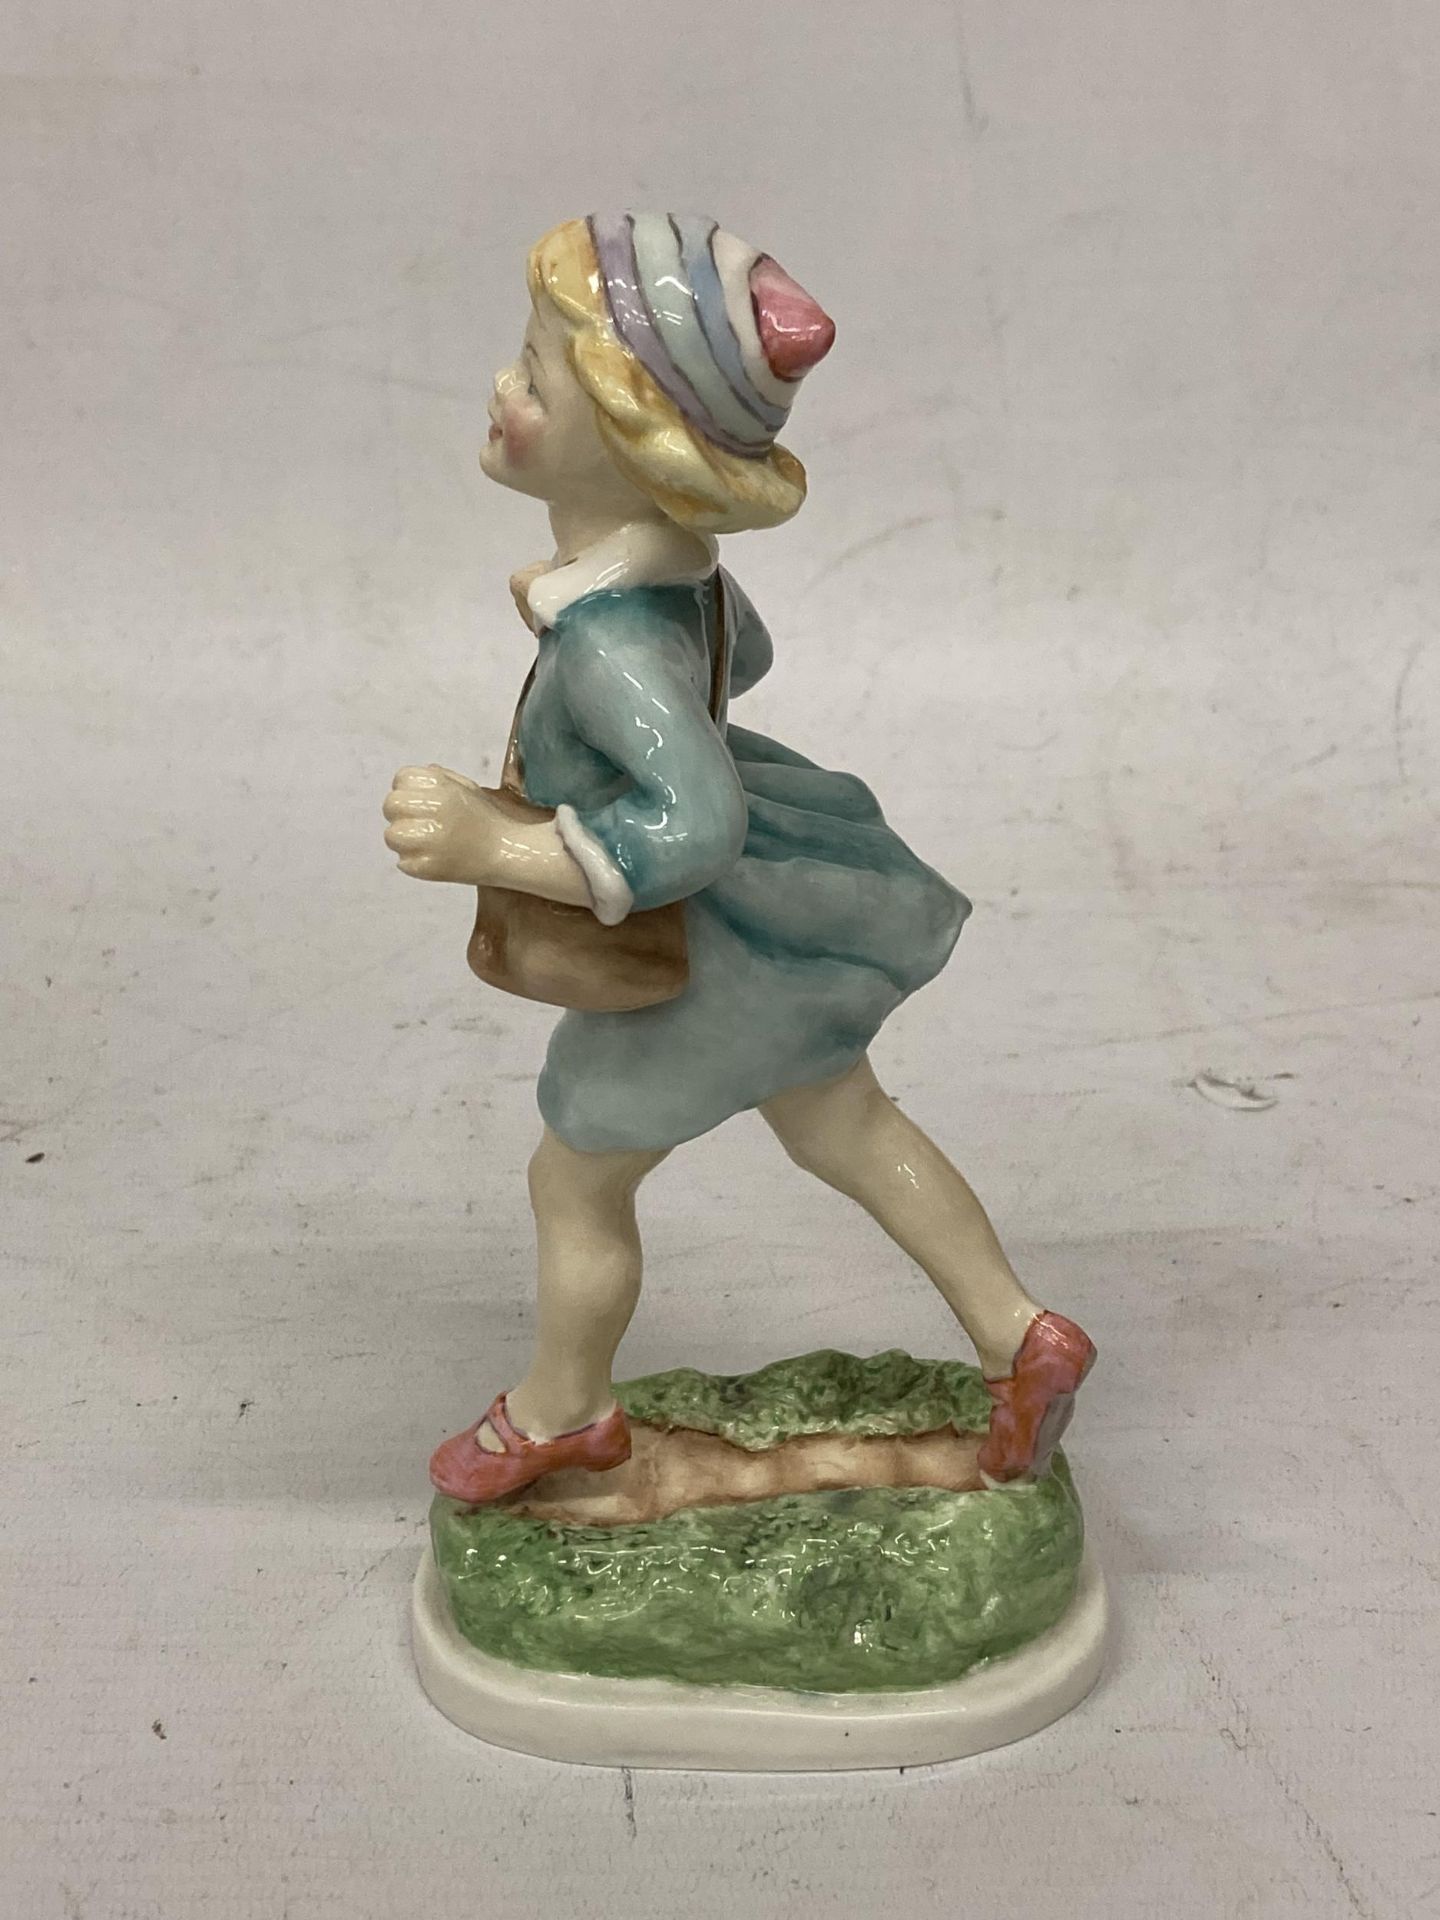 A ROYAL WORCESTER FIGURE "THURSDAY'S CHILD HAS FAR TO GO" 3522 - Image 3 of 5